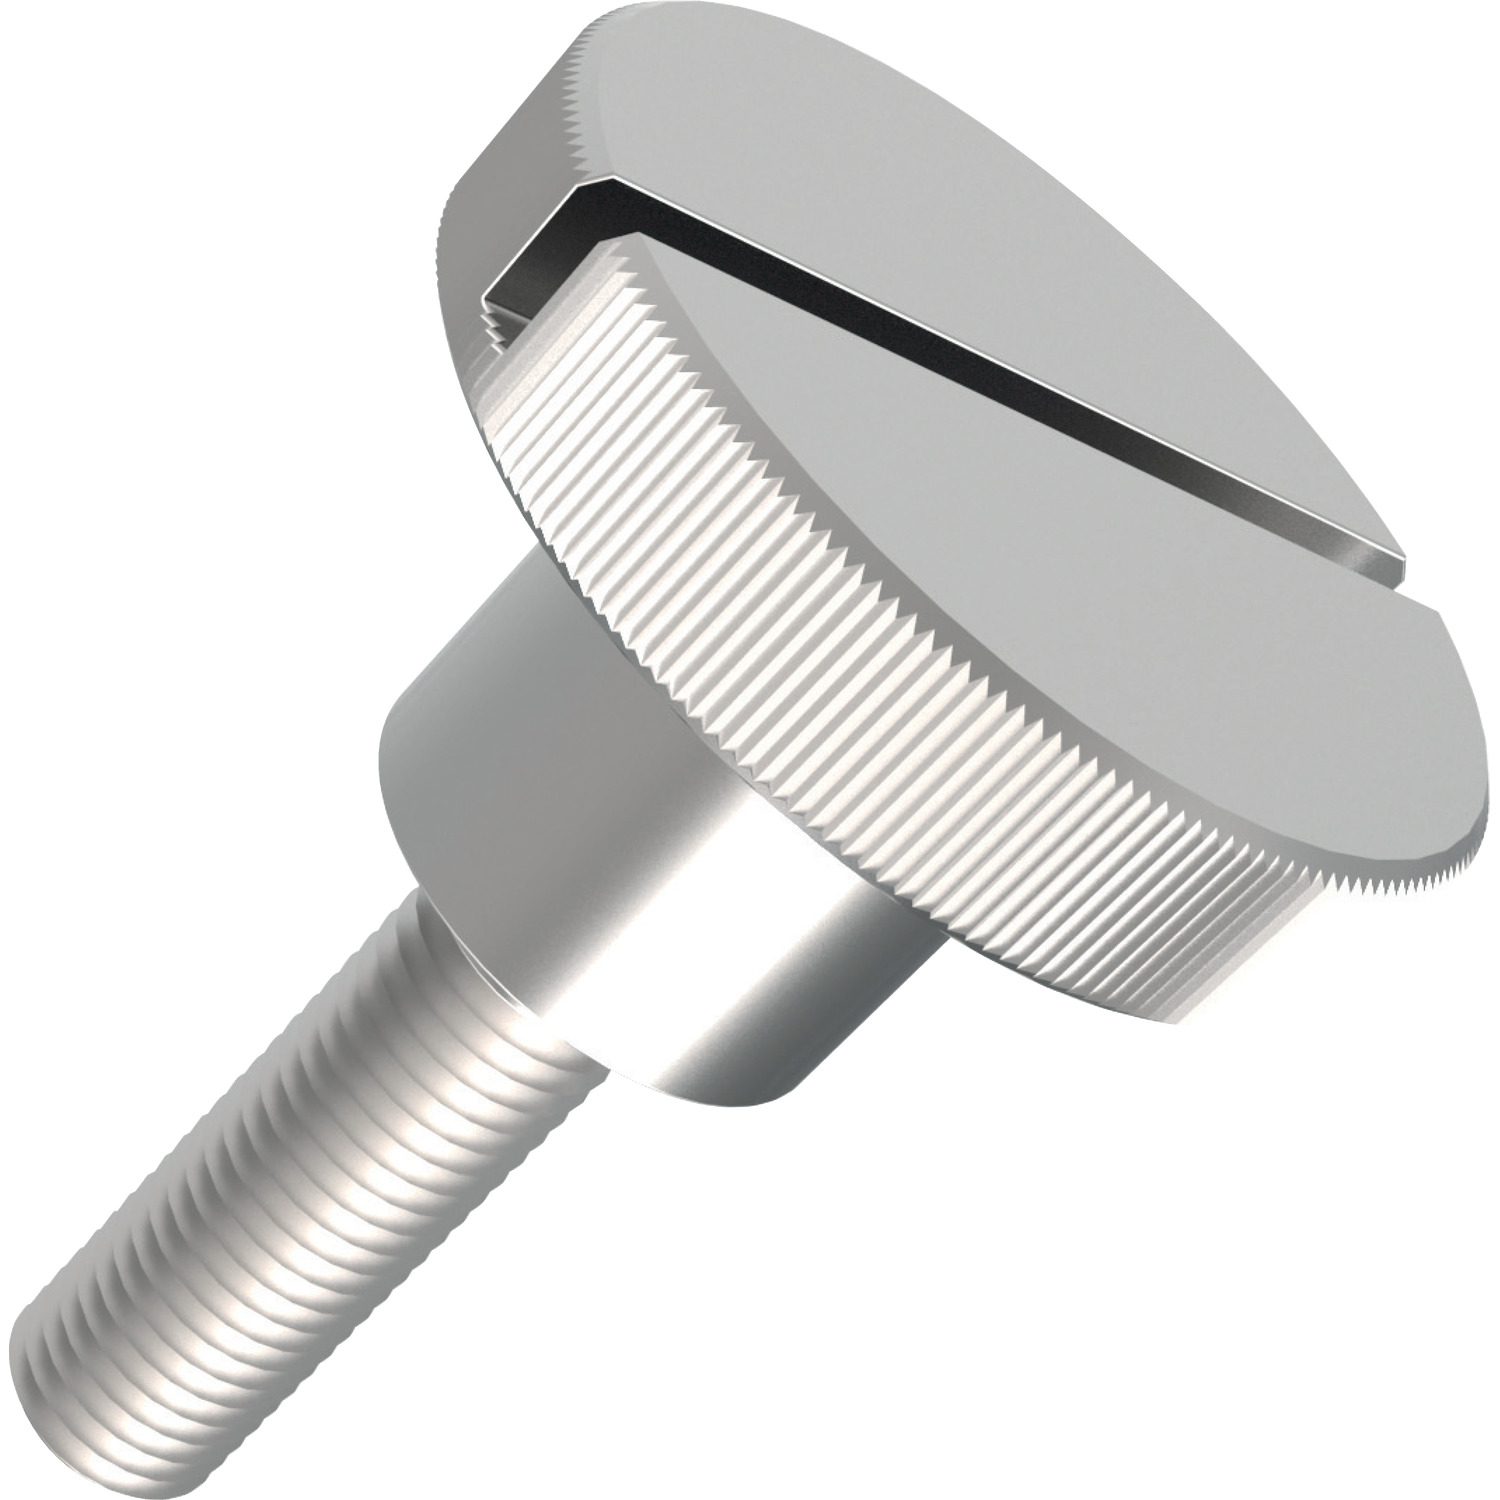 P0404.050-010-A2 Knurled Thumb Screws Slotted M5x10 A2s/s 